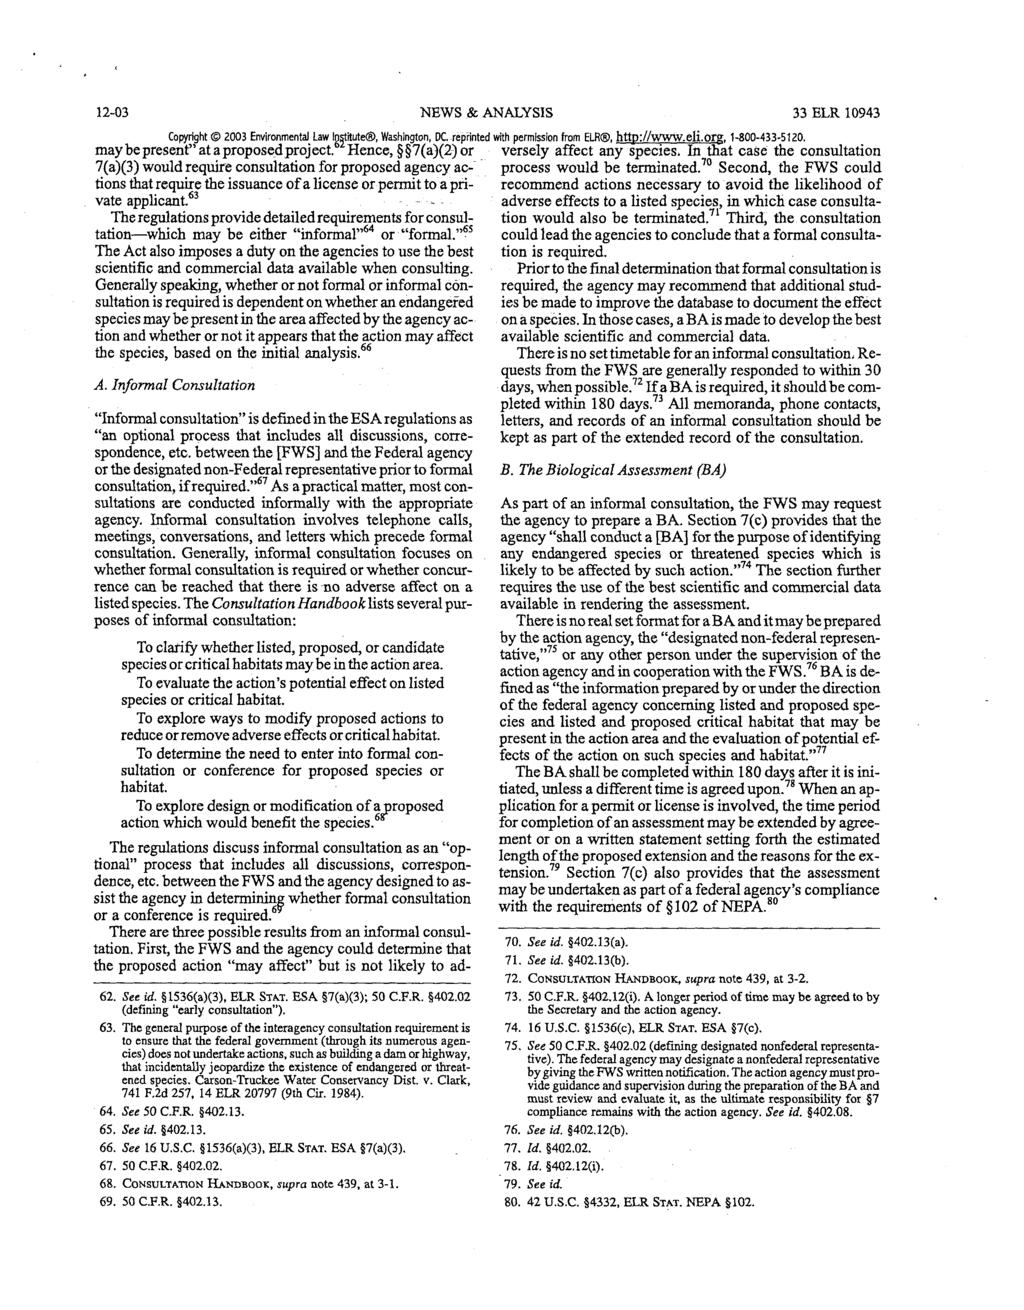 12-03 NEWS & ANALYSIS 33 ELR 10943 Copyright 2003 Environmental^ Law Institute, Washington, DC. reprinted with permission from ELR, http://www.eli.org, 1-800-433-5120.